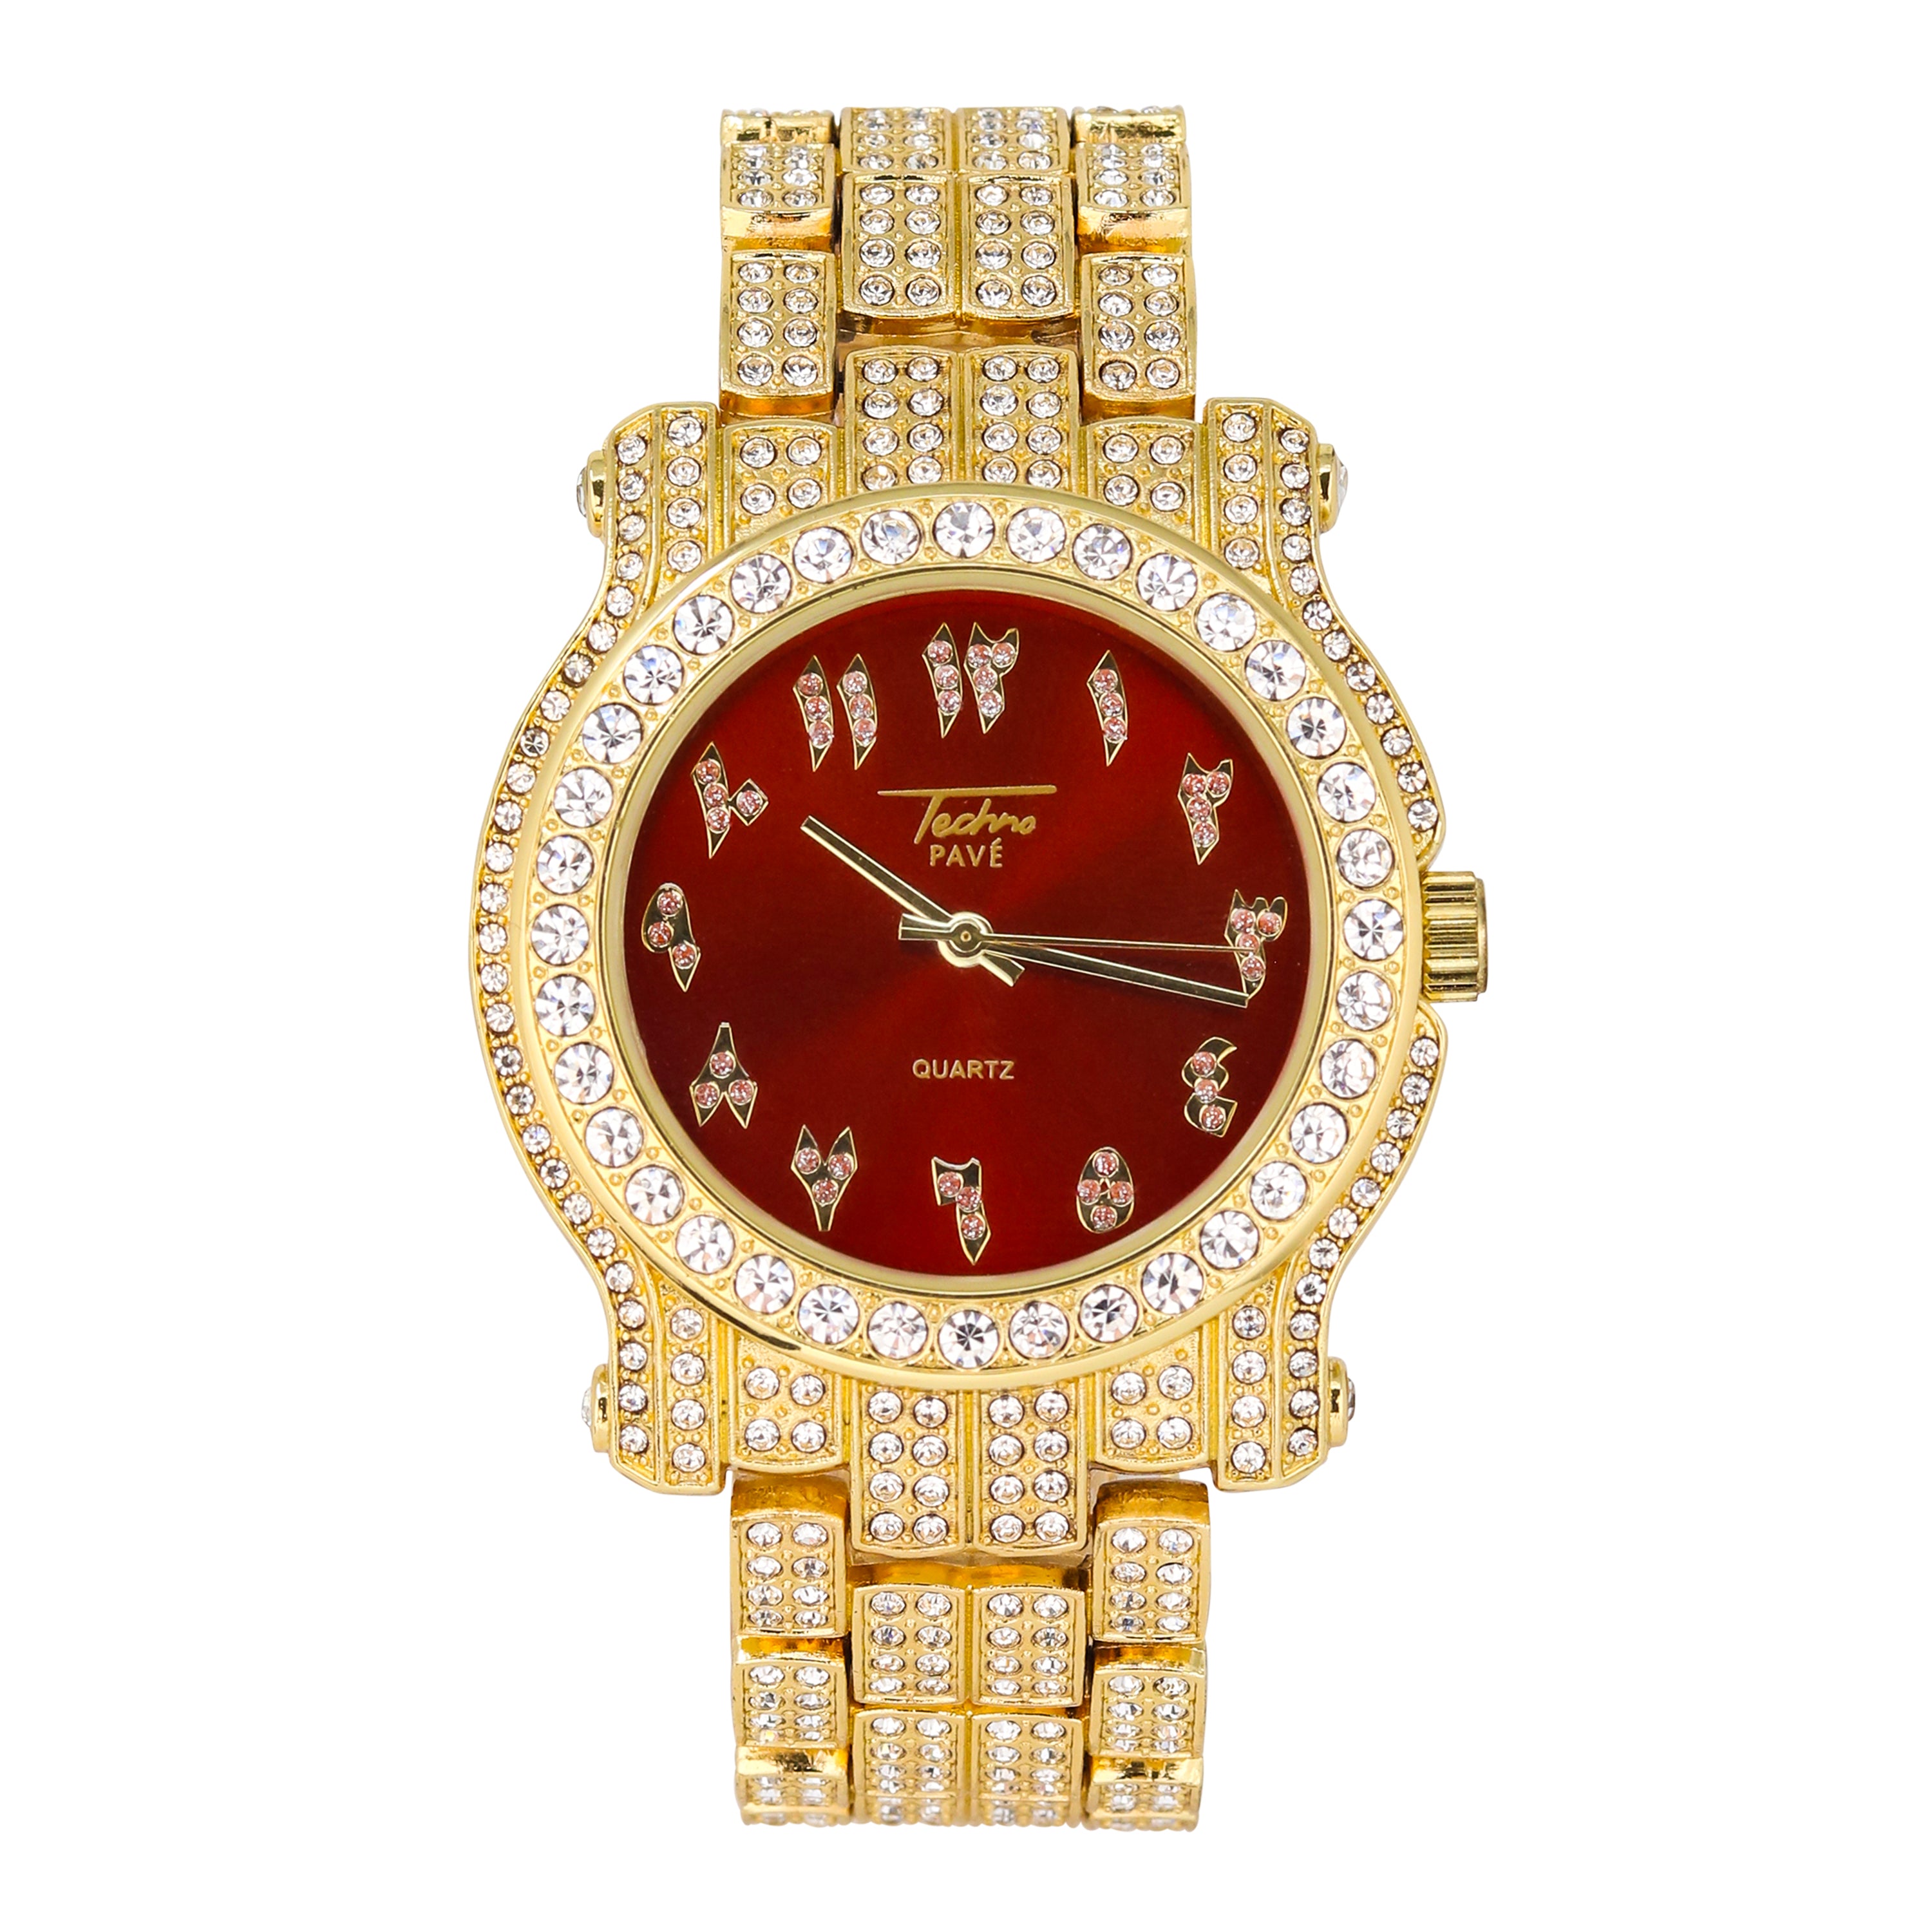 Men's Round Iced Out Watch 45mm Gold - Arabic Dial